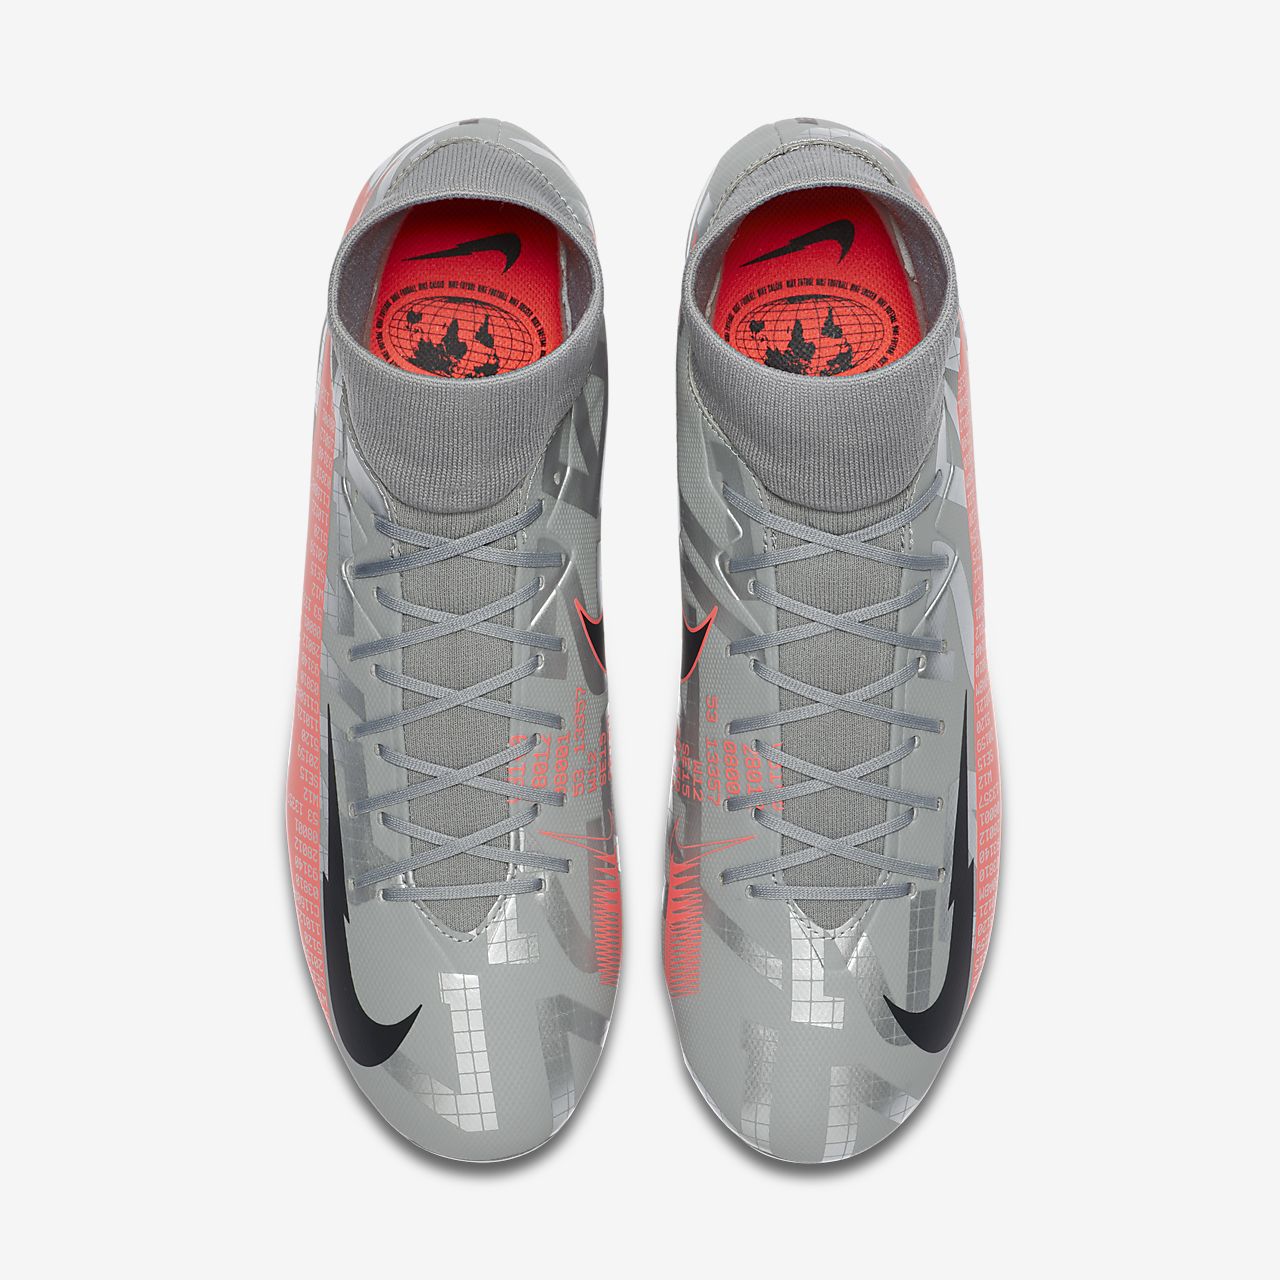 Nike Mercurial Superfly VII Academy MDS TF Football Shoes.